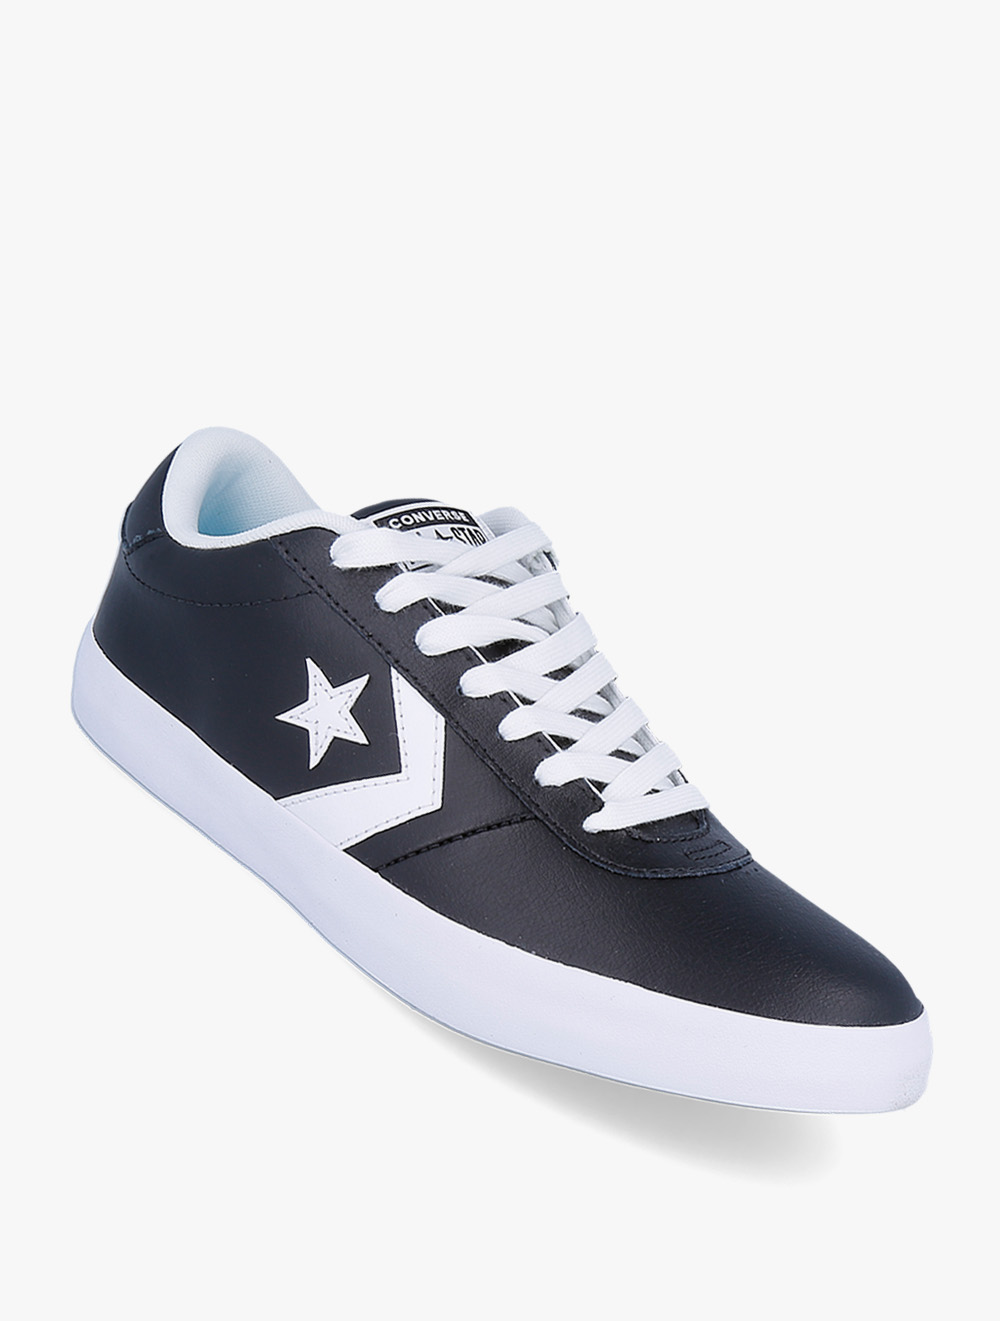 converse point star trainers mens